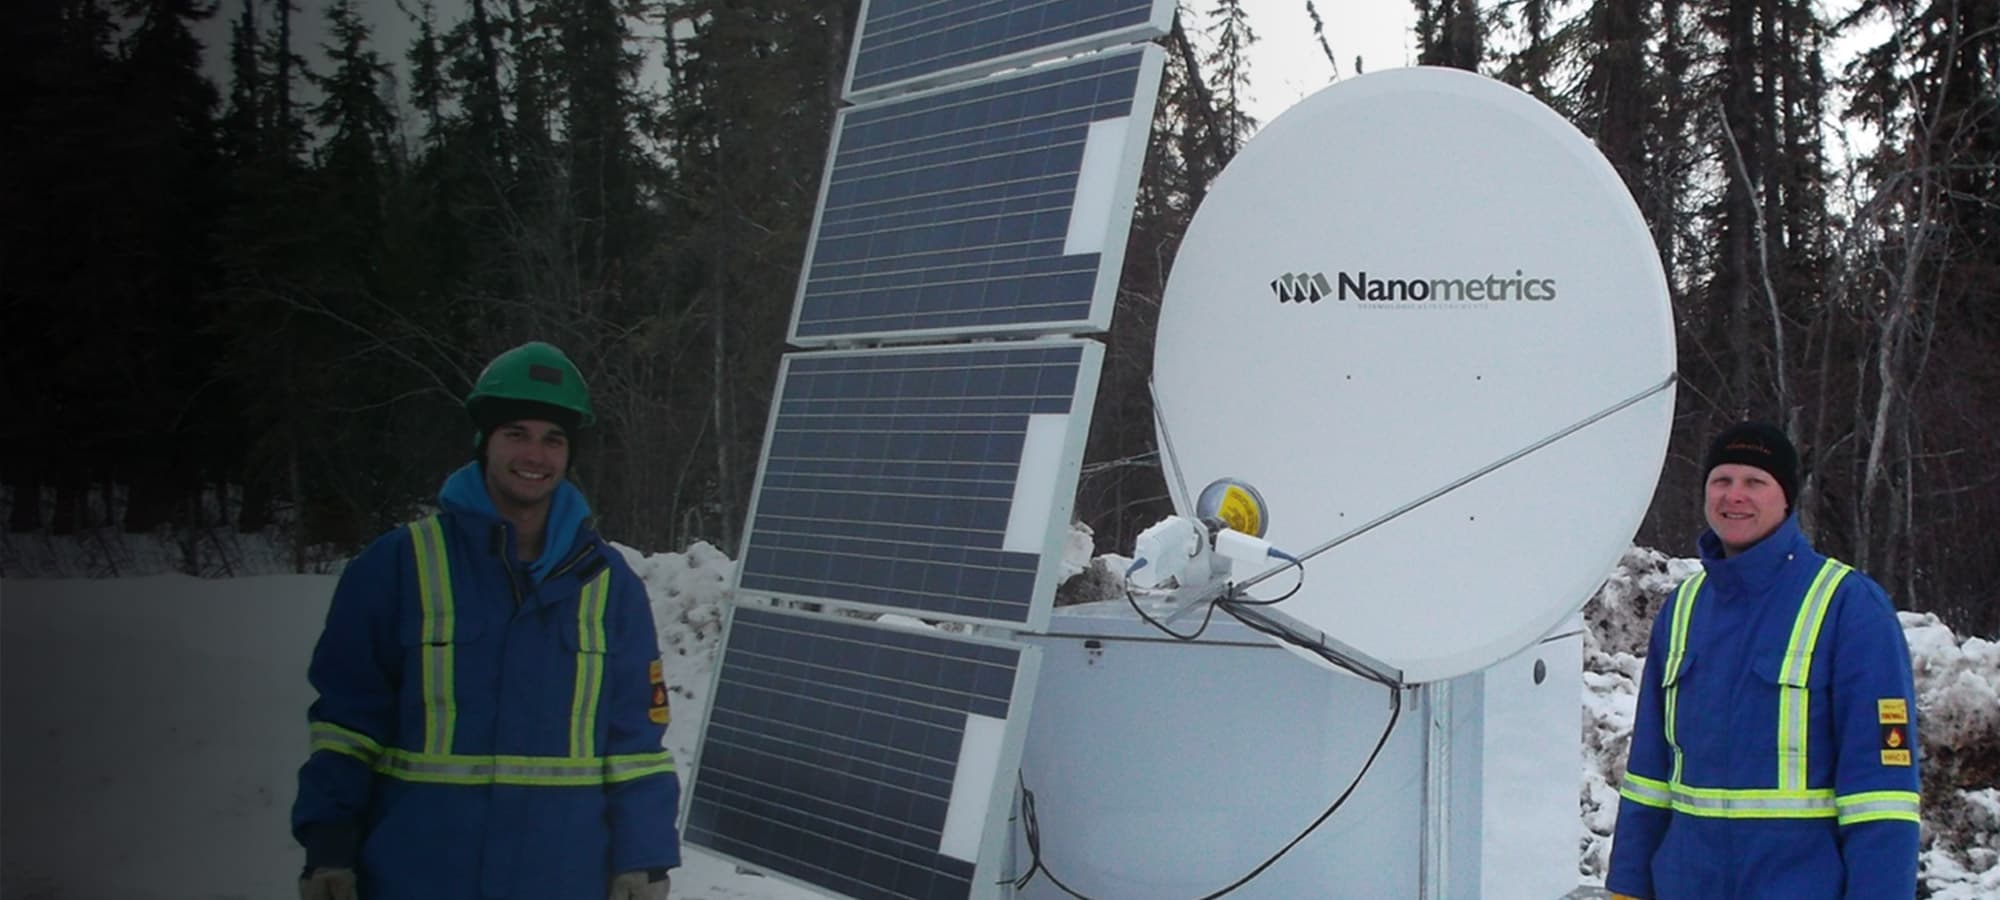 Technicians standing beside Nanometrics Seismic Array in winter conditions in wooded area